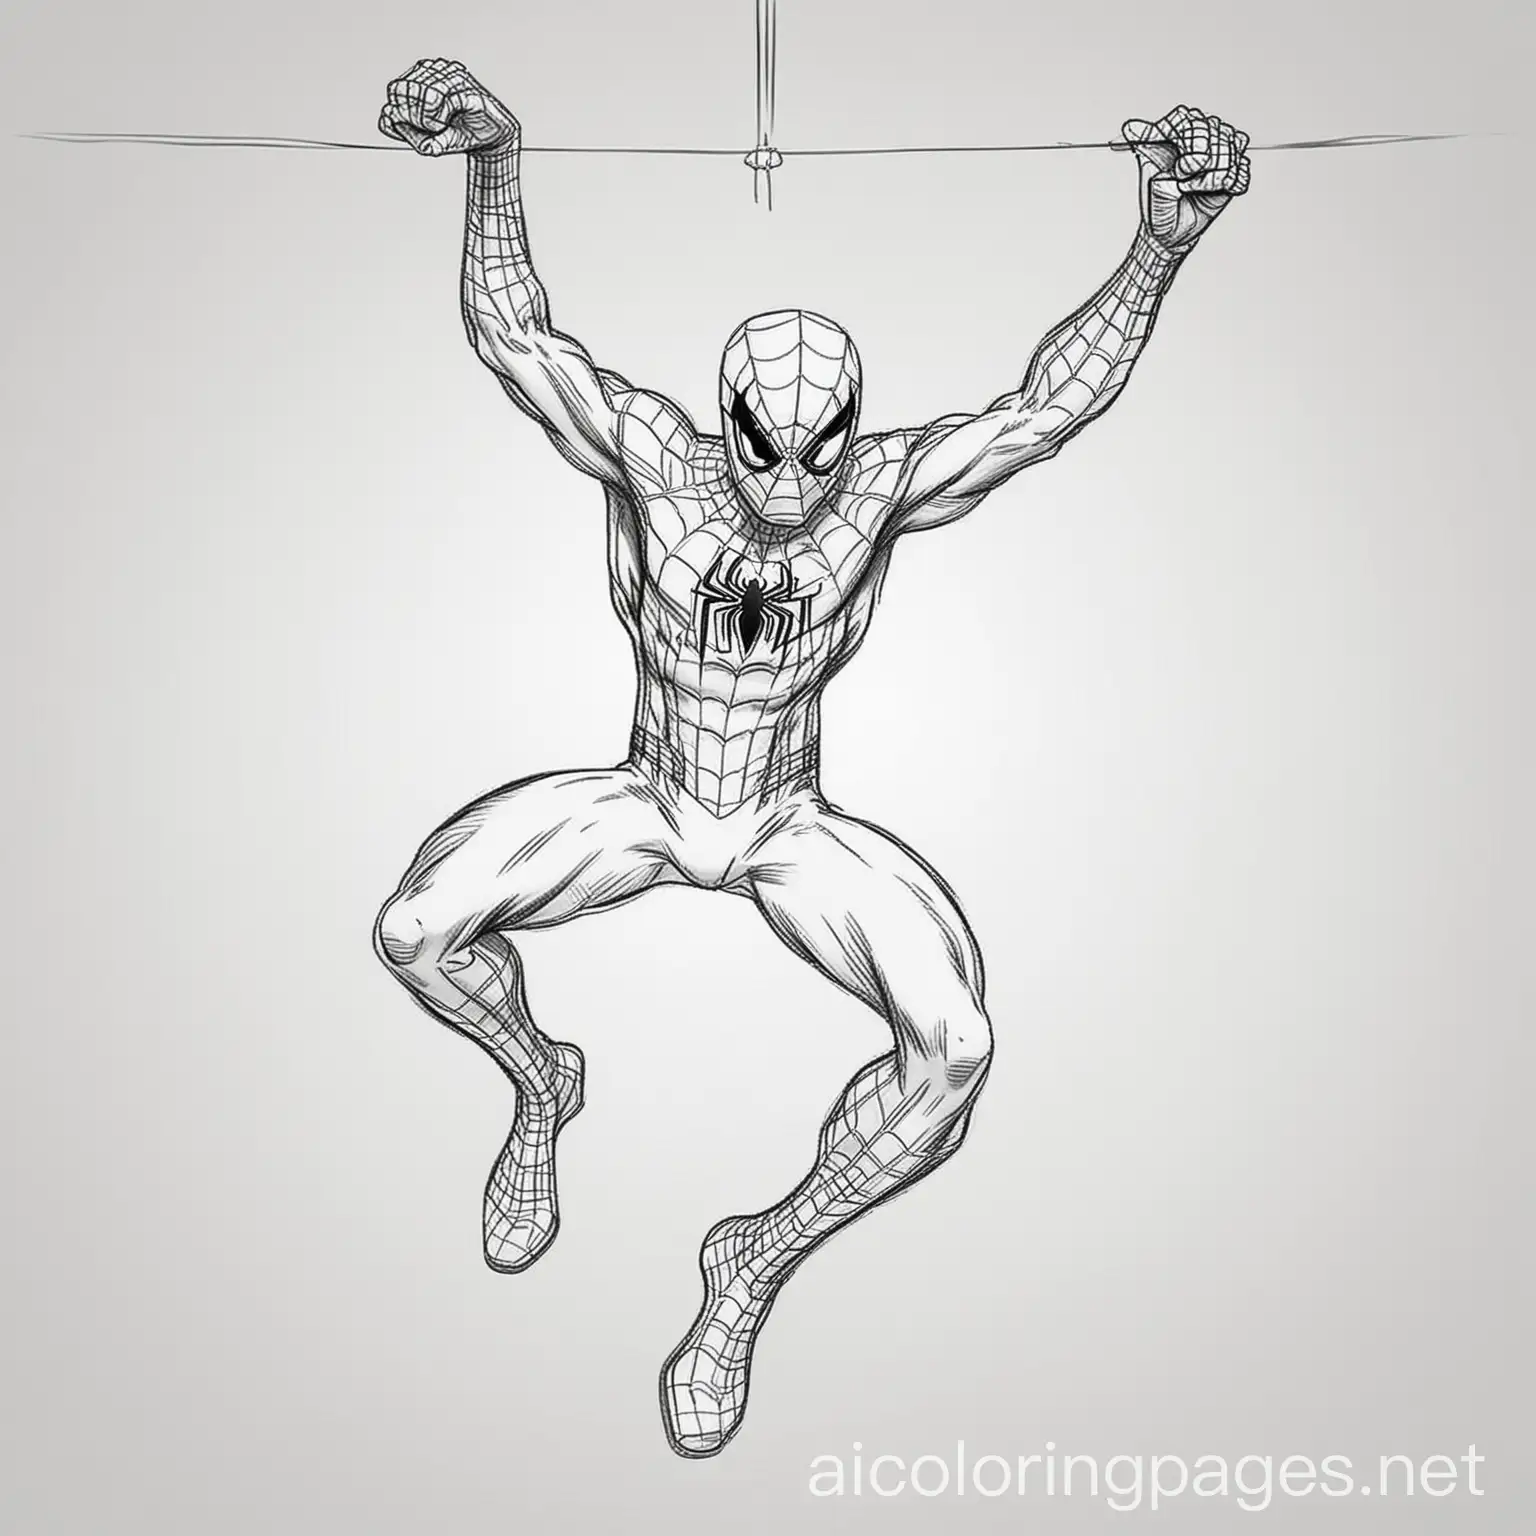 spiderman hanging from the ceiling, Coloring Page, black and white, line art, white background, Simplicity, Ample White Space. The background of the coloring page is plain white to make it easy for young children to color within the lines. The outlines of all the subjects are easy to distinguish, making it simple for kids to color without too much difficulty, Coloring Page, black and white, line art, white background, Simplicity, Ample White Space. The background of the coloring page is plain white to make it easy for young children to color within the lines. The outlines of all the subjects are easy to distinguish, making it simple for kids to color without too much difficulty